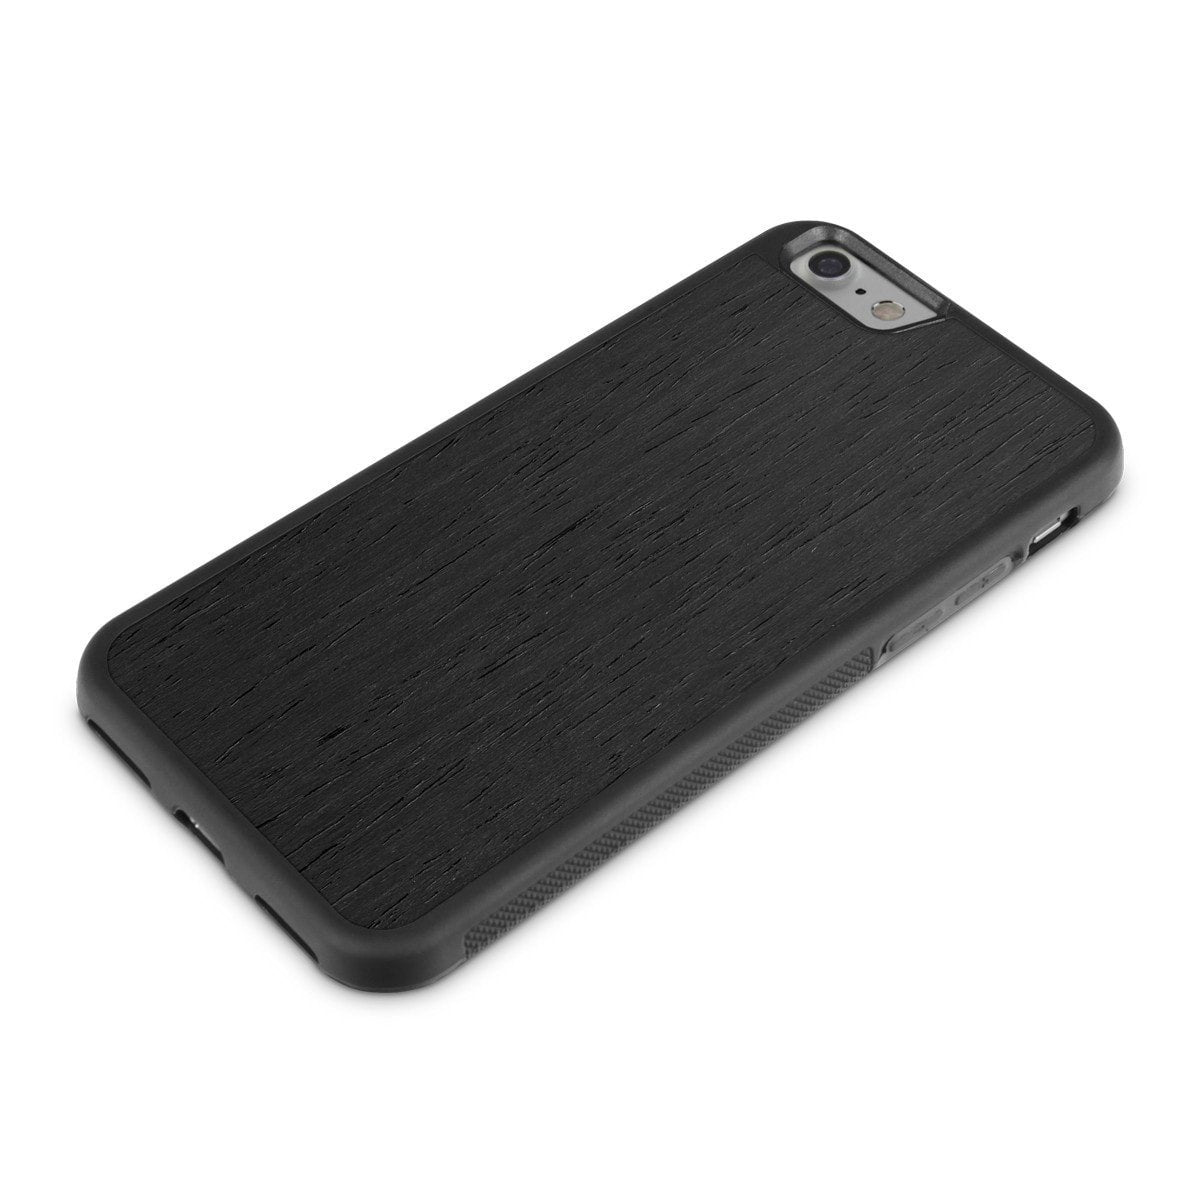  iPhone 7 —  #WoodBack Explorer Case - Cover-Up - 4